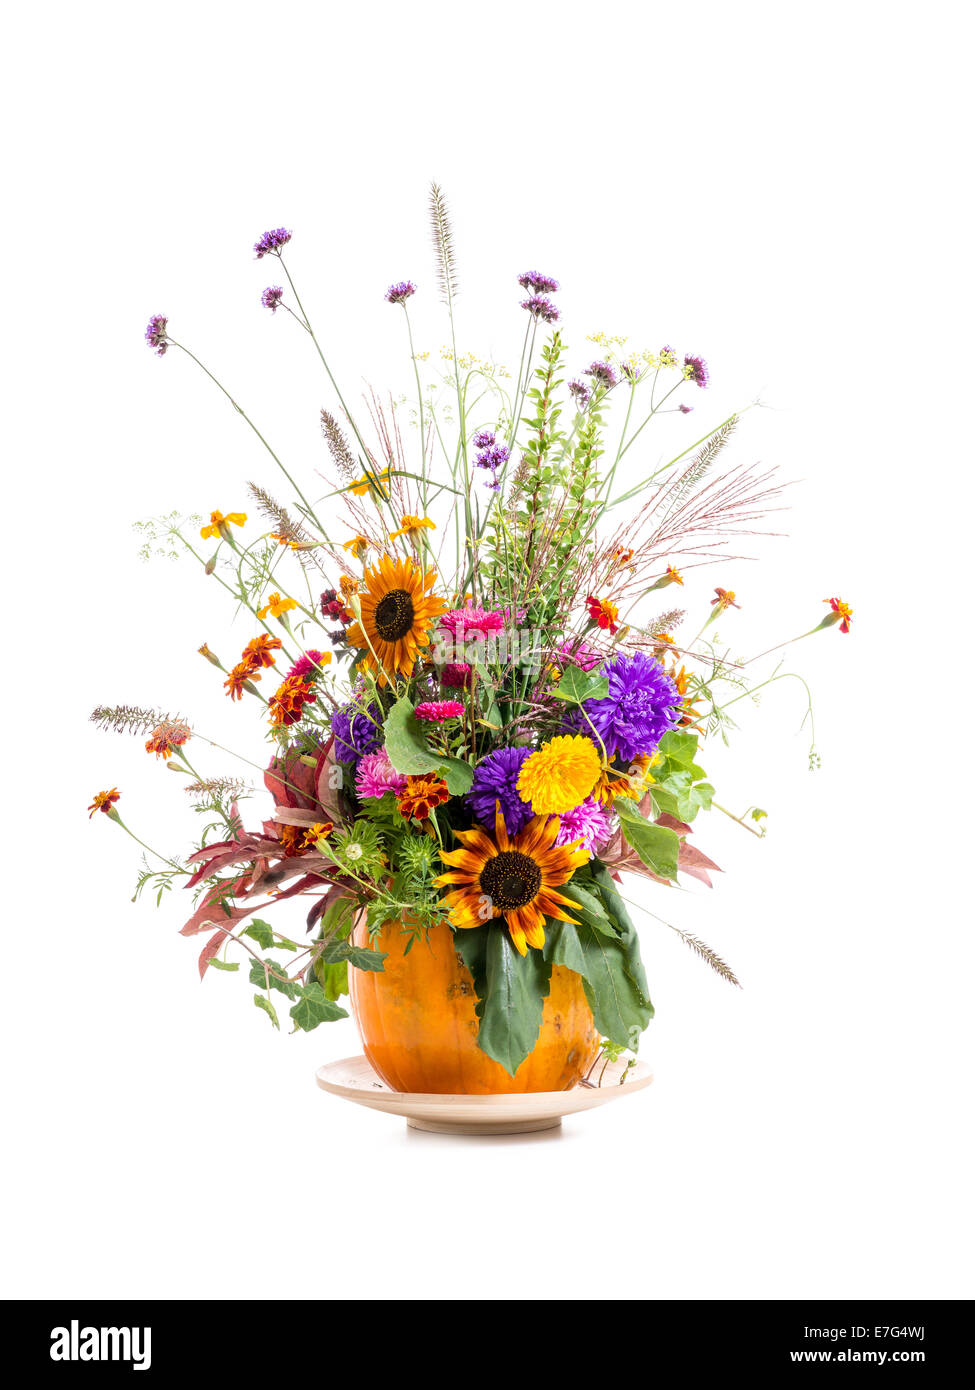 Wild flowers bouquet in carved pumpkin vase over white background Stock Photo